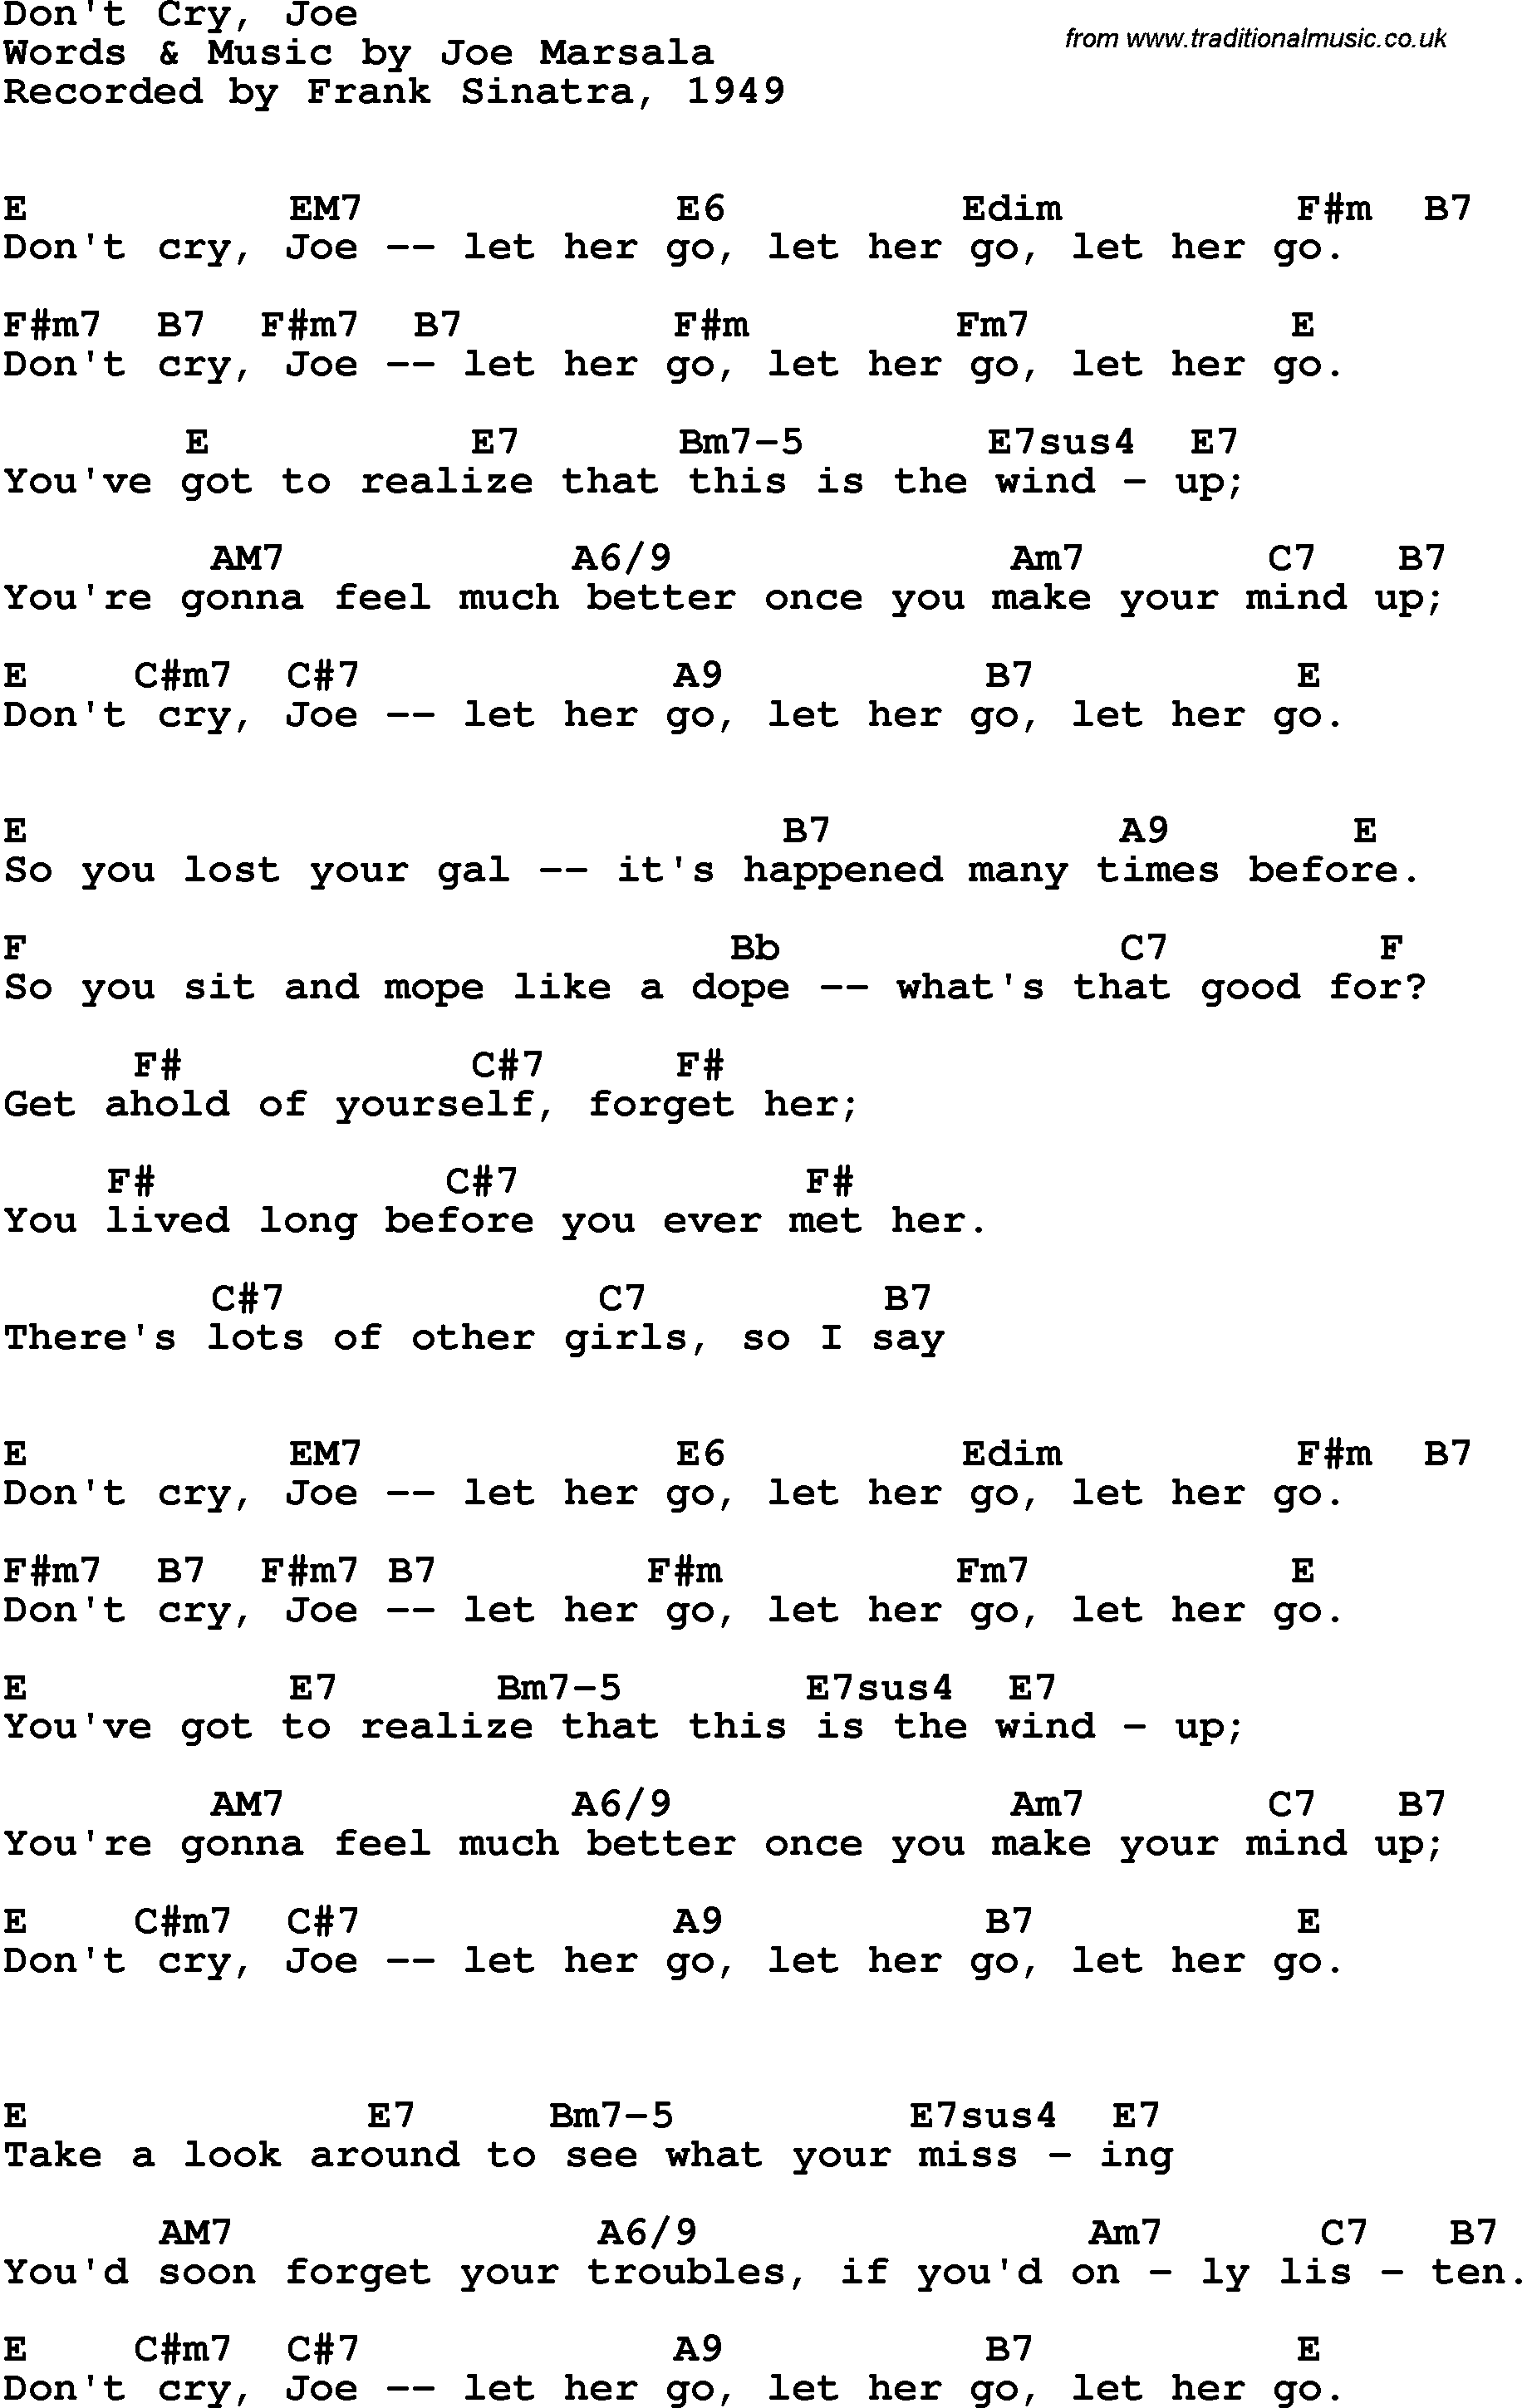 Song Lyrics with guitar chords for Don't Cry, Joe - Frank Sinatra, 1949